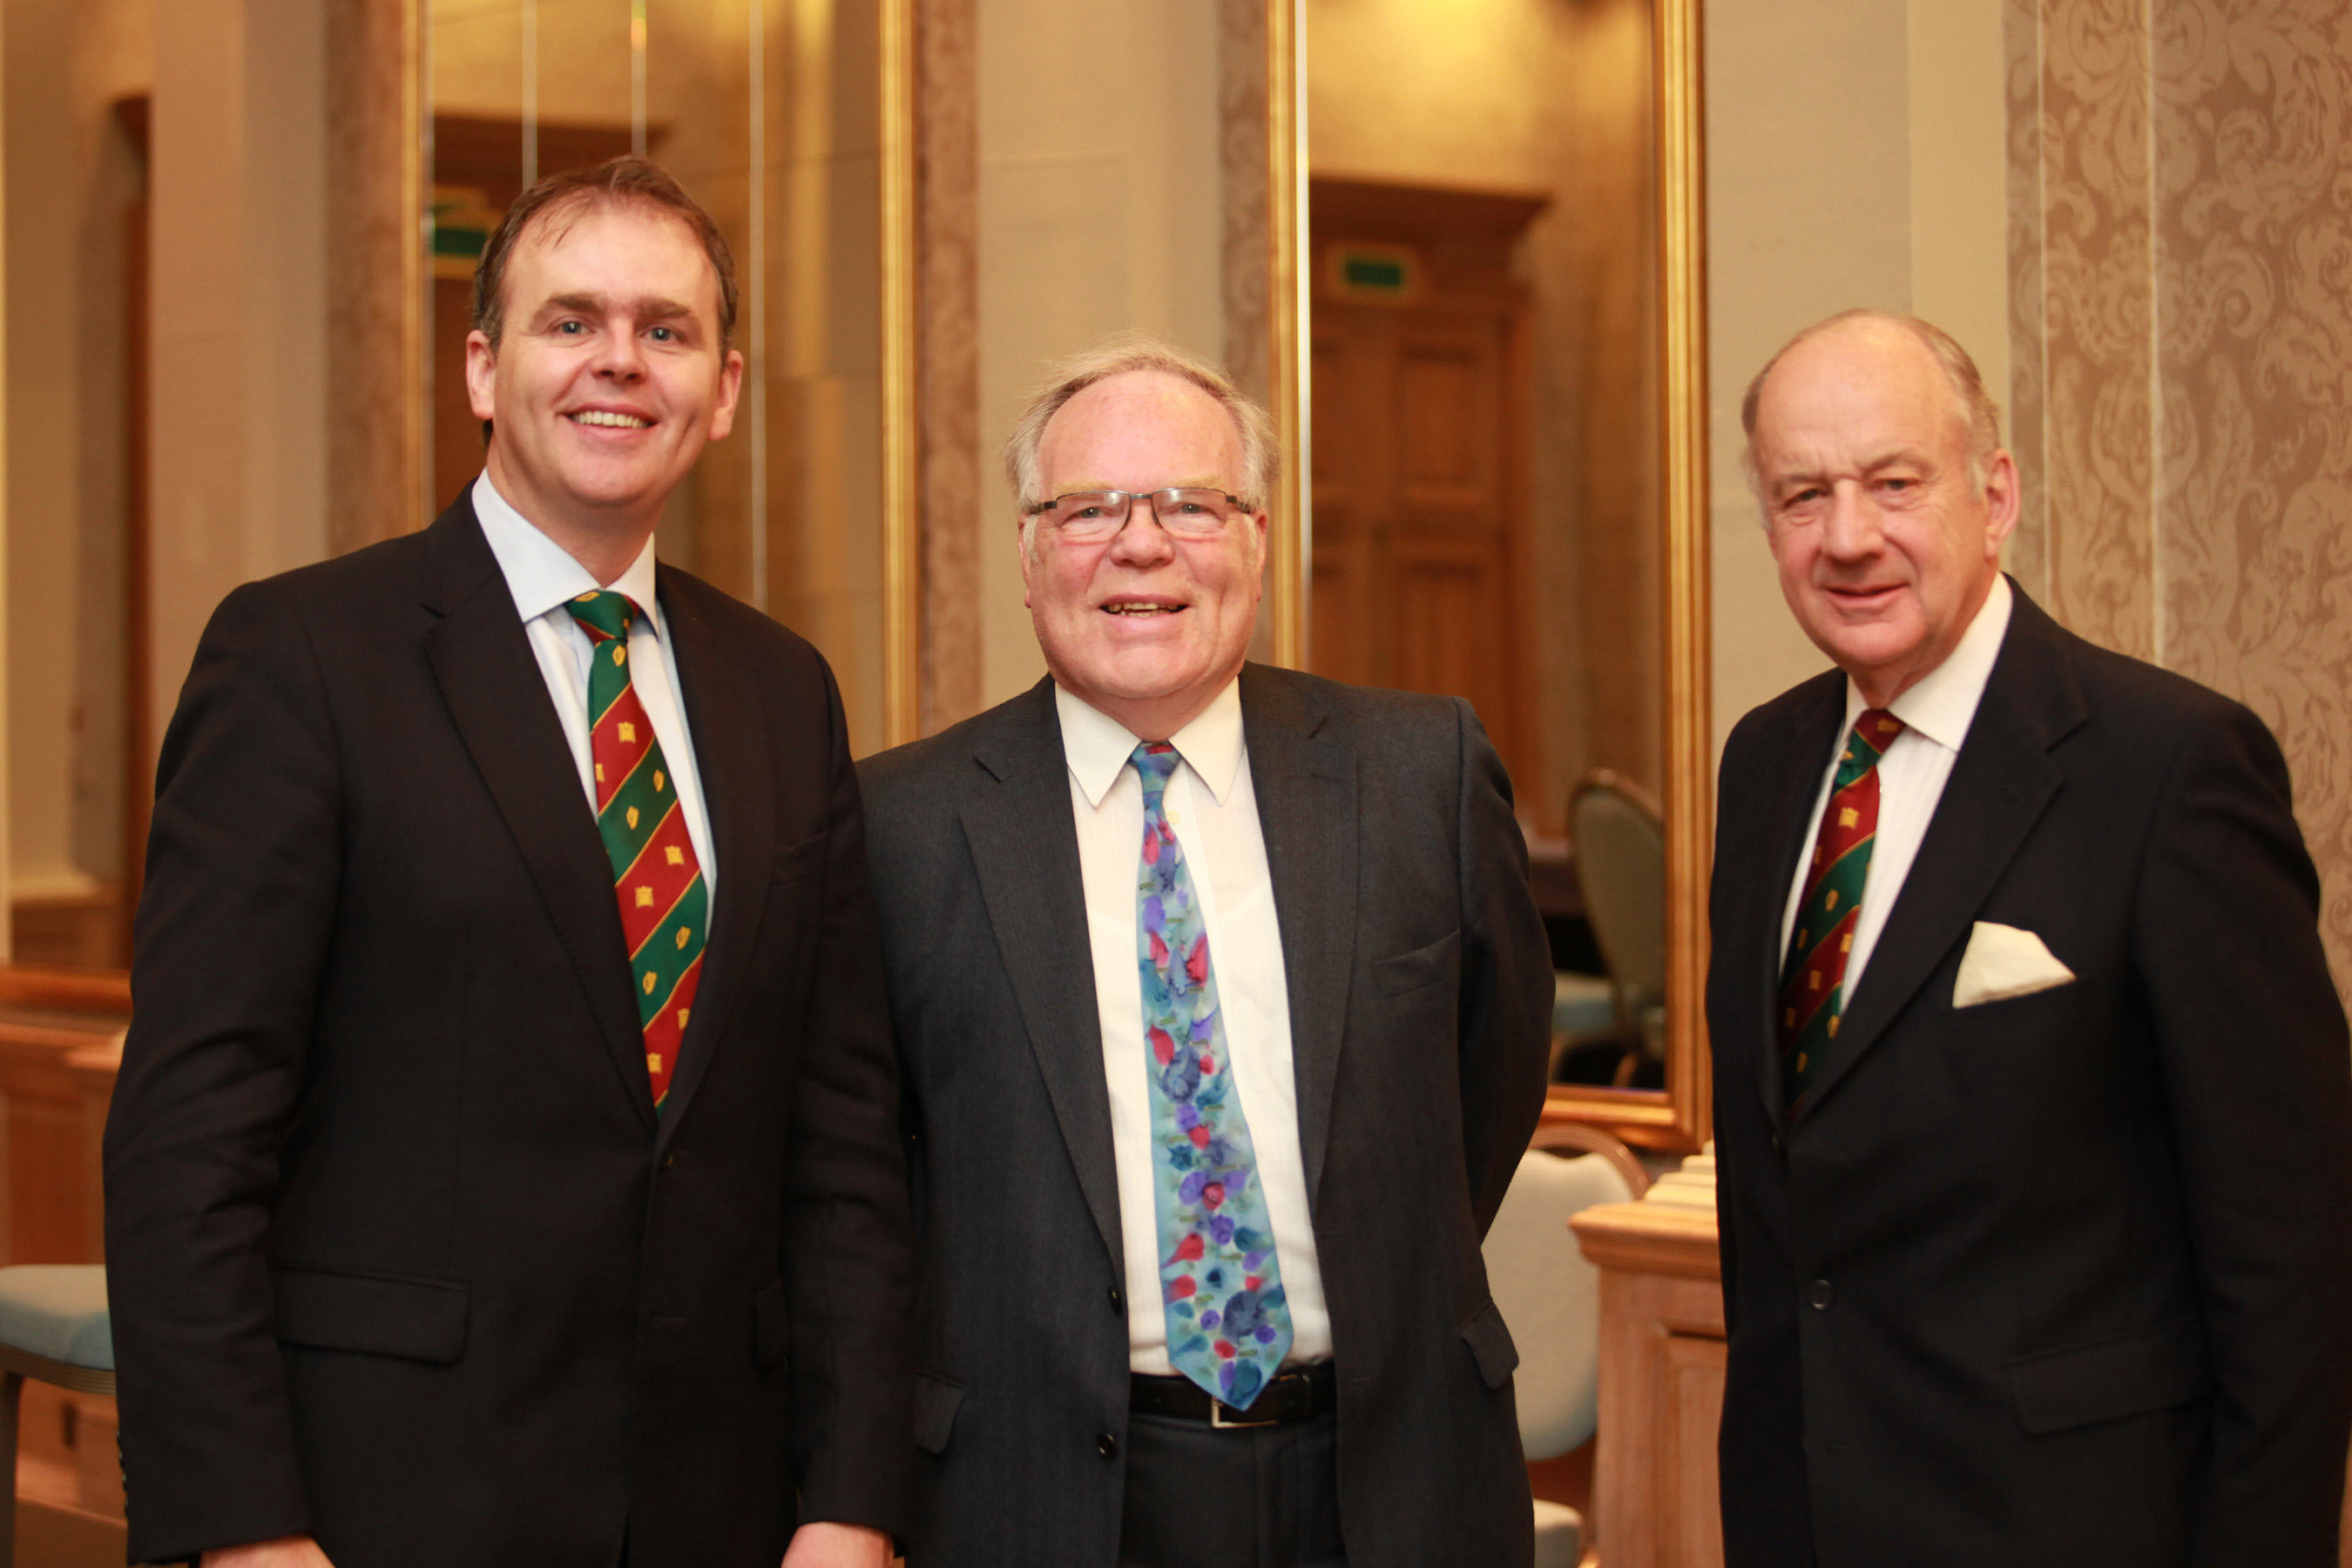 The Co-Chairmen of the Assembly with Lord Shutt following his address to the 43rd plenary on MOnday 24 October 2011